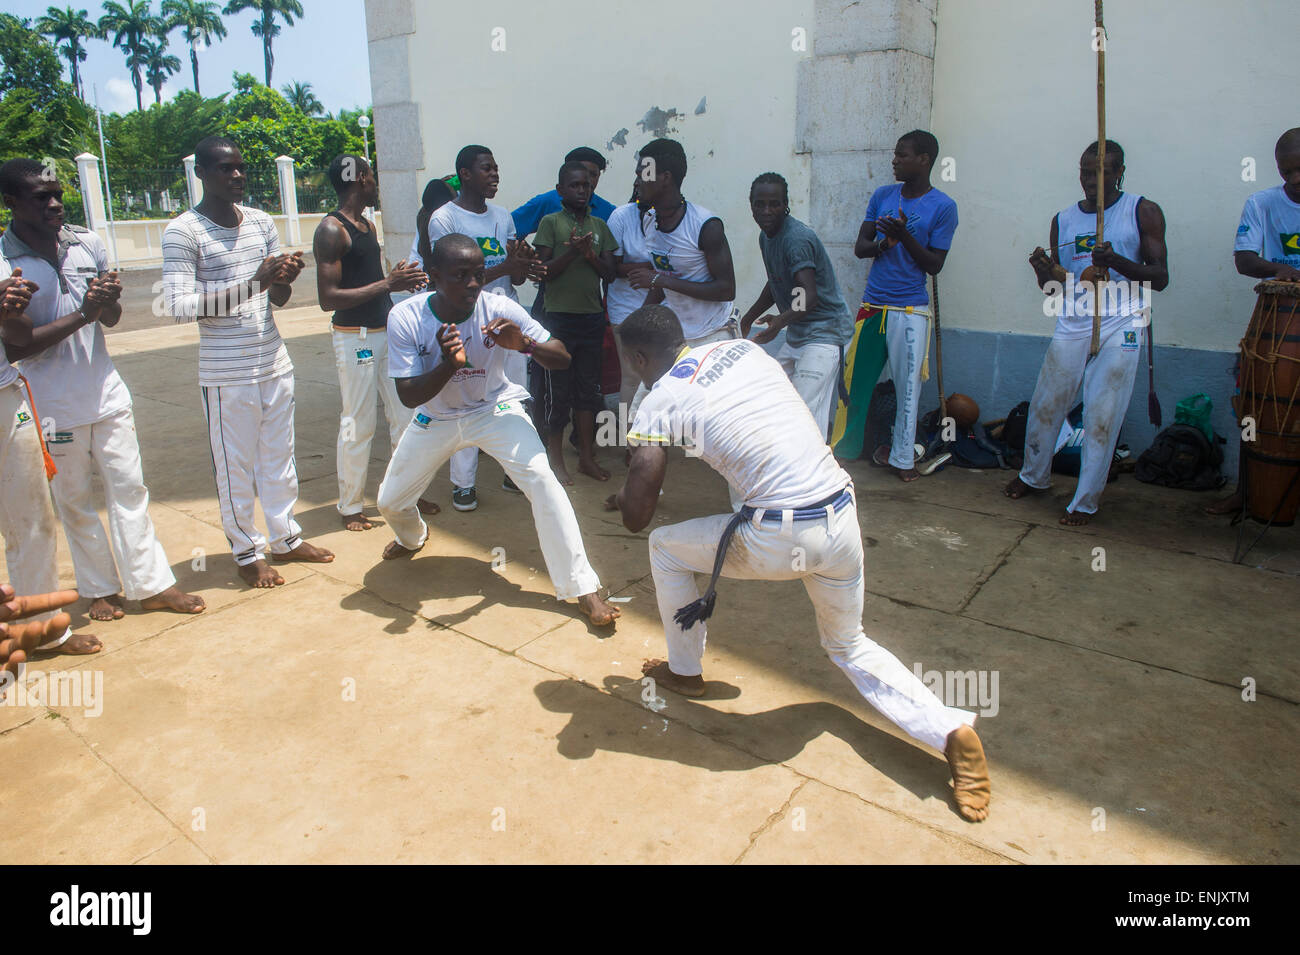 Young boys performing Capoeira in the city of Sao Tome, Sao Tome and Principe, Atlantic Ocean, Africa Stock Photo